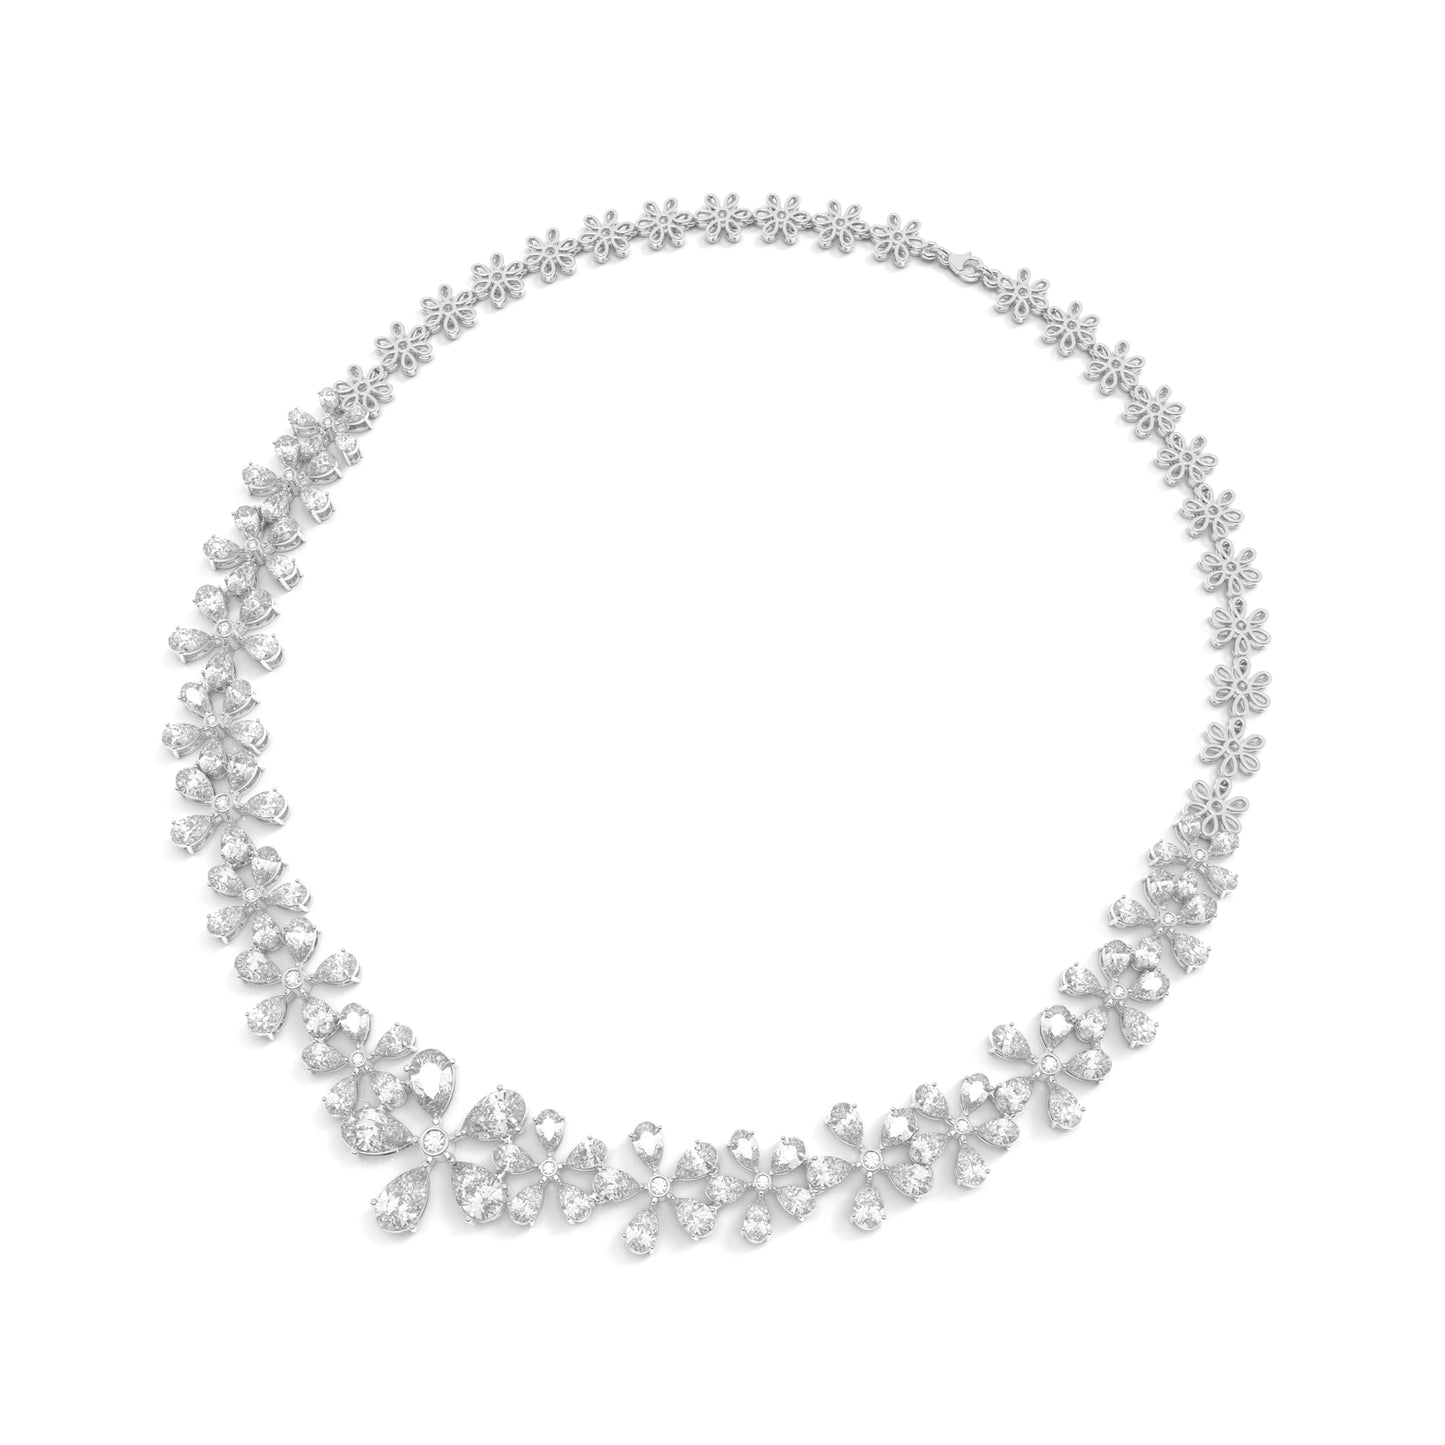 Timeless Beauty: Lab-Grown Diamond Necklaces in Pear and Round Shape